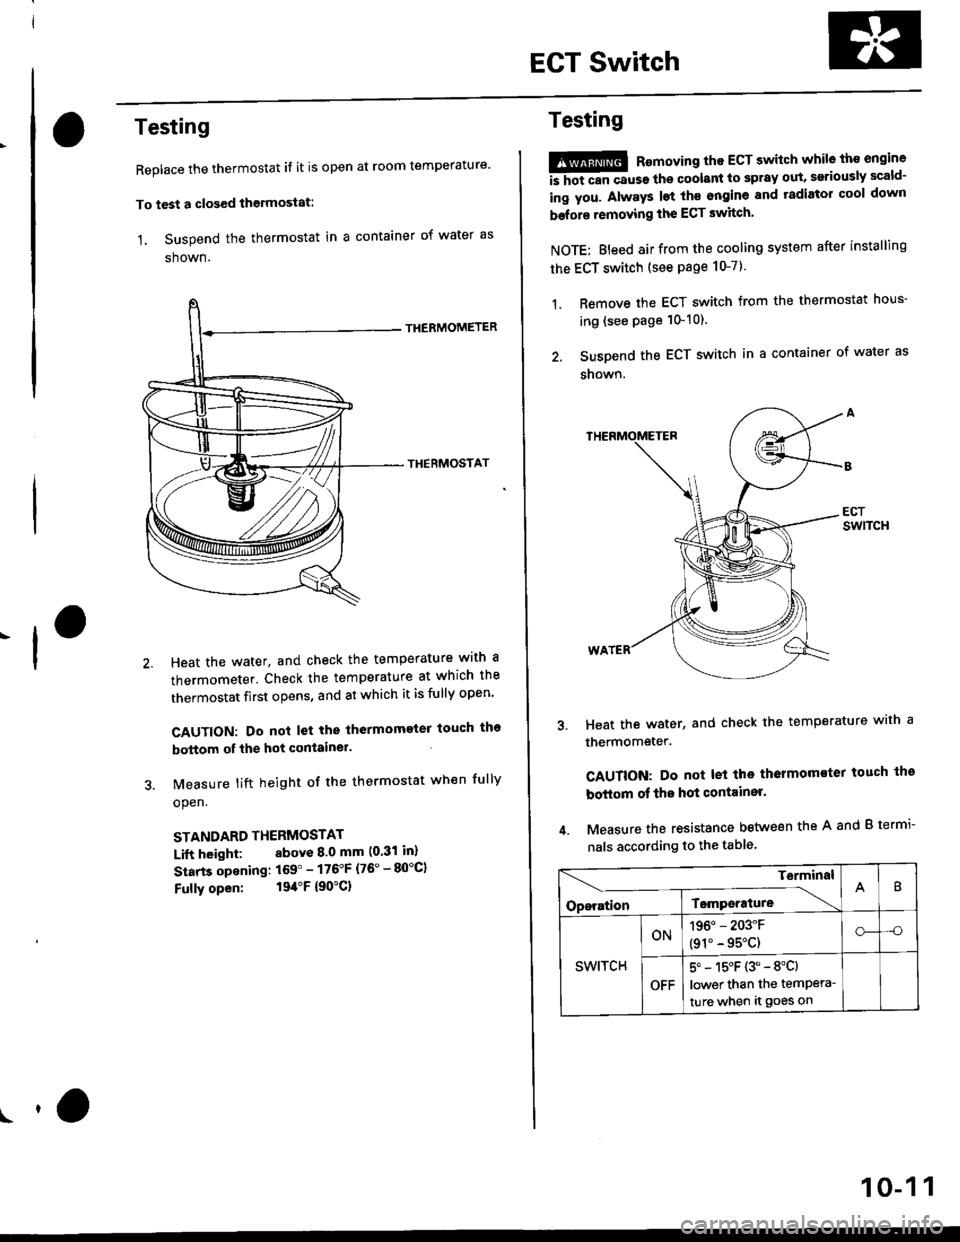 HONDA CIVIC 1997 6.G User Guide EGT Switch
-f
Testing
Replace the thermostat if it is open at room temperature
To test a closed thermostat:
1, Suspend the thermostat in a container of water as
shown.
THEBMOMETER
THERMOSTAT
Heat the